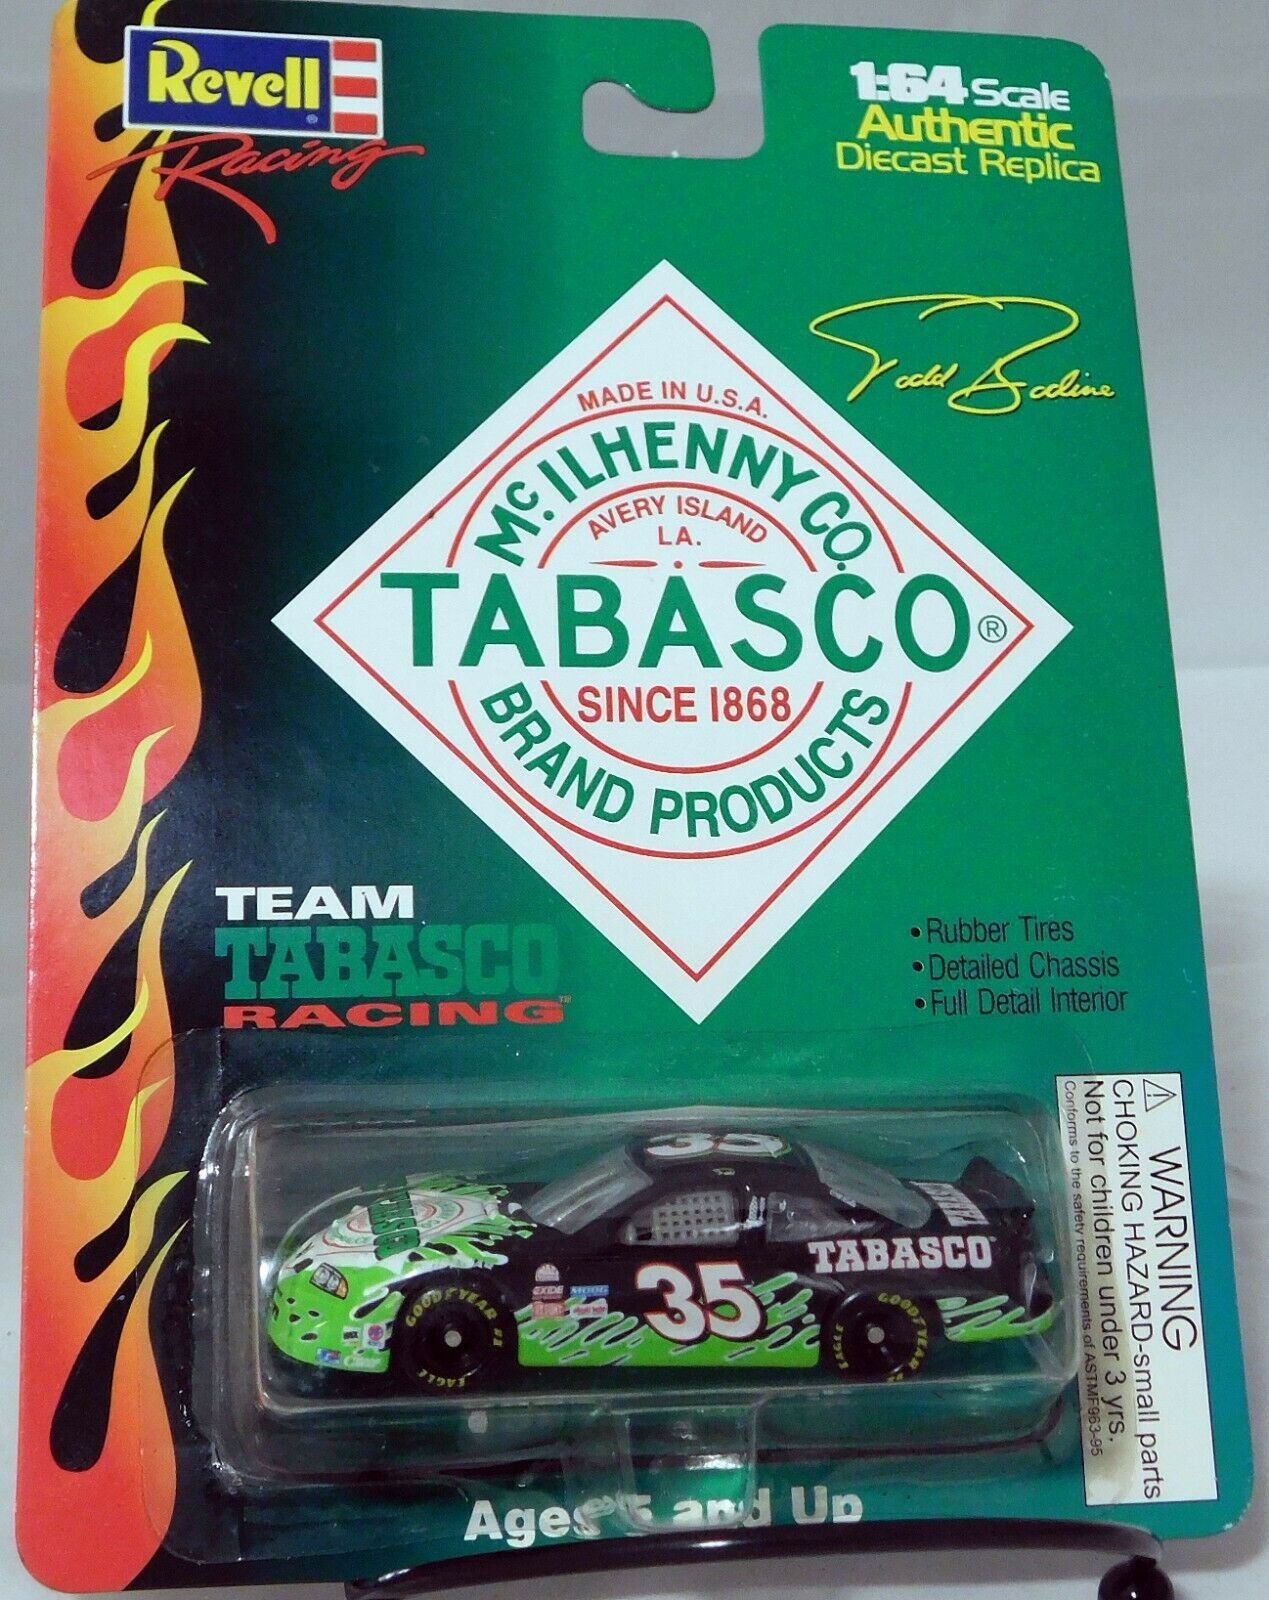 Racing Action Platinum Series Kyle Petty 1/64 Stock Car W/Display Case LE 1995 